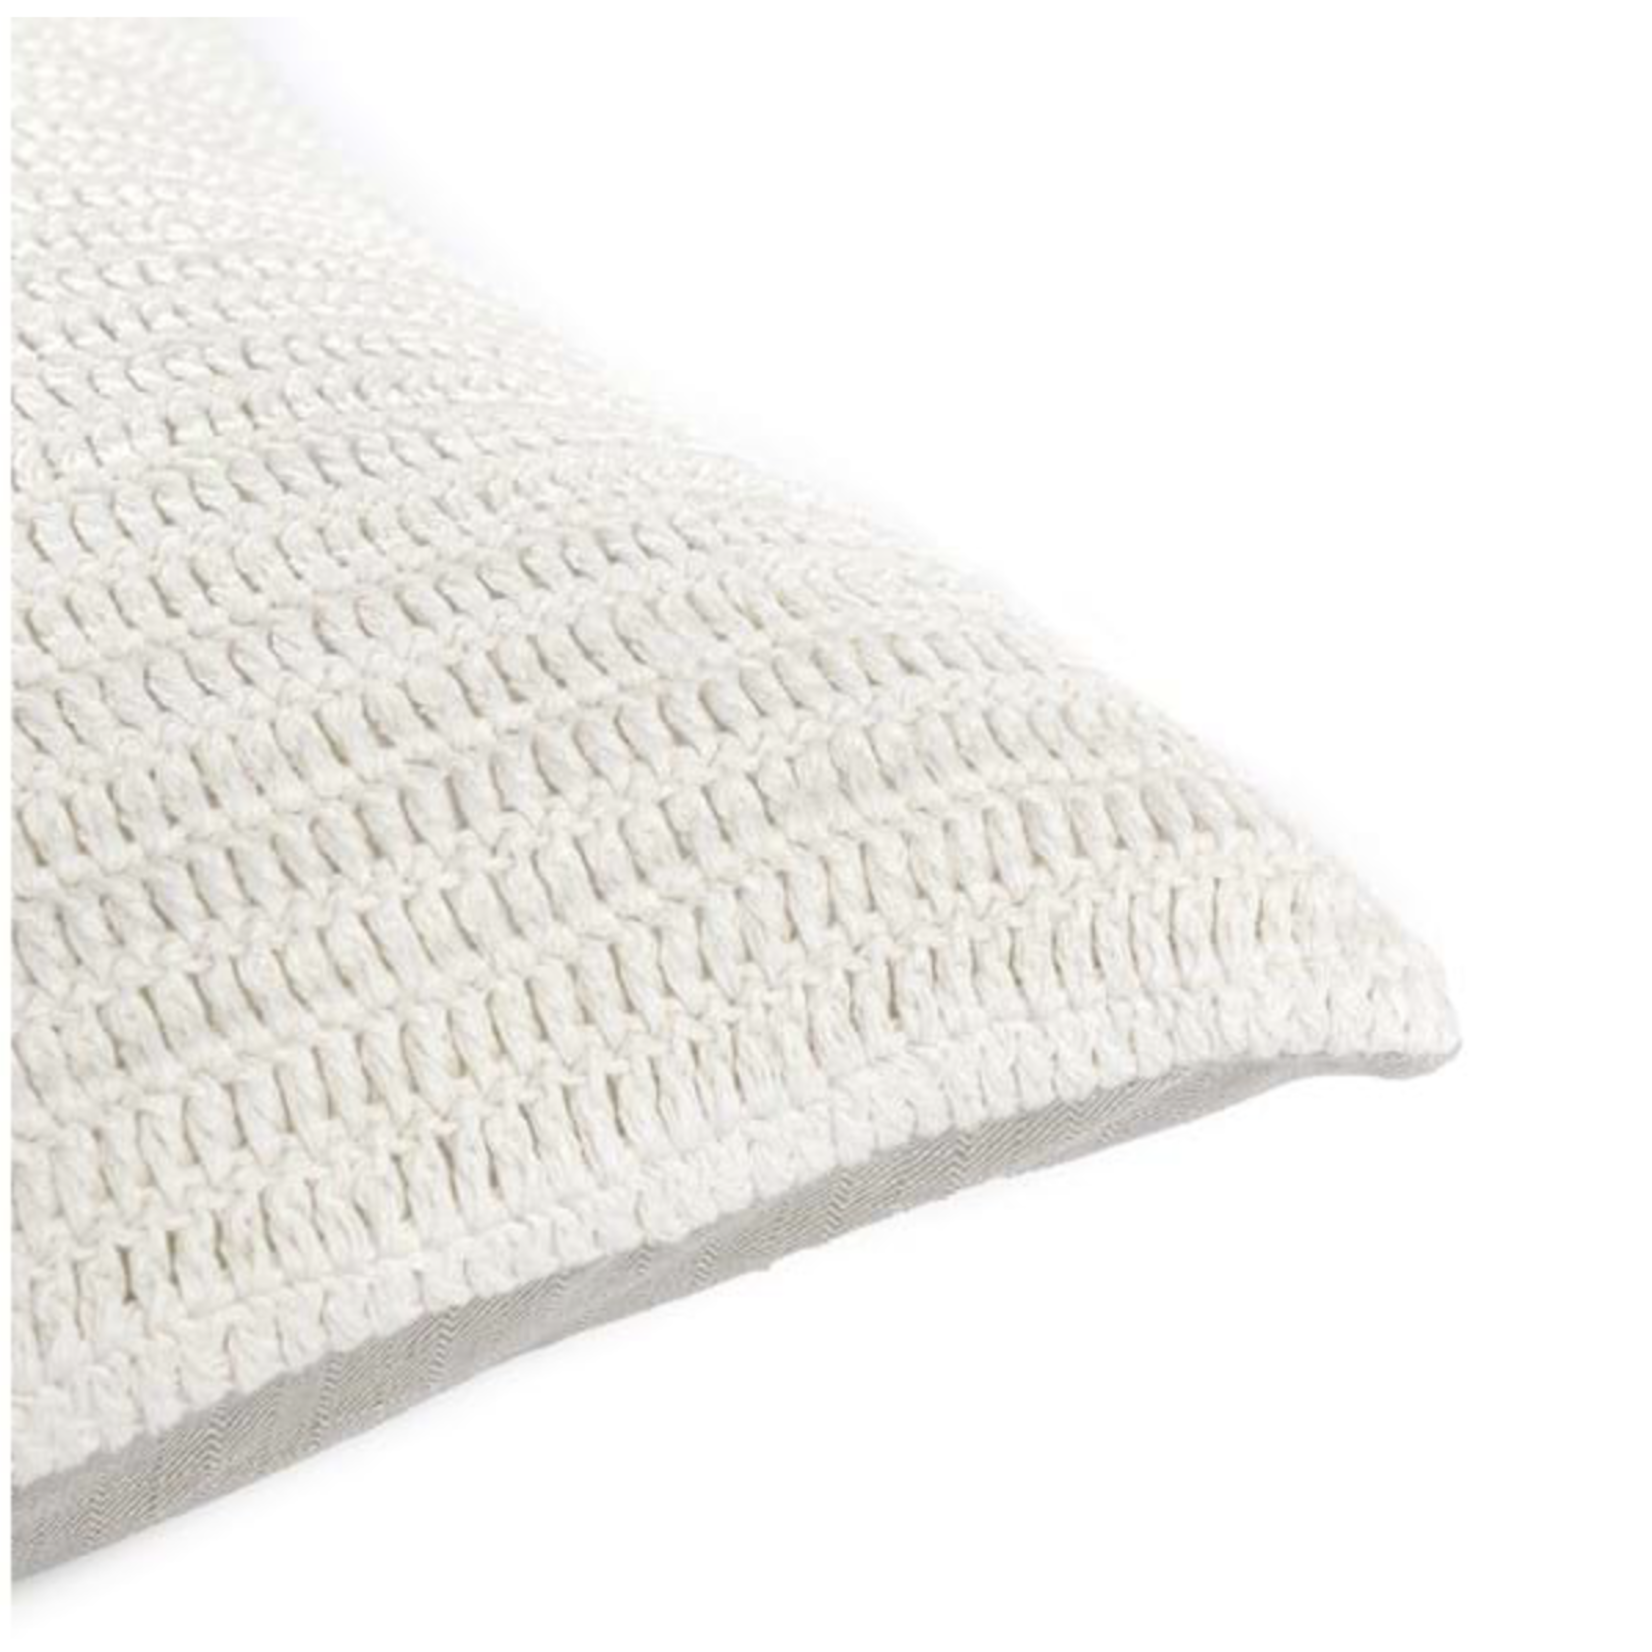 Outside The Box 36x16 SLD Rina Ivory Hand-Knitted 100% Belgian Flax Linen Pillow